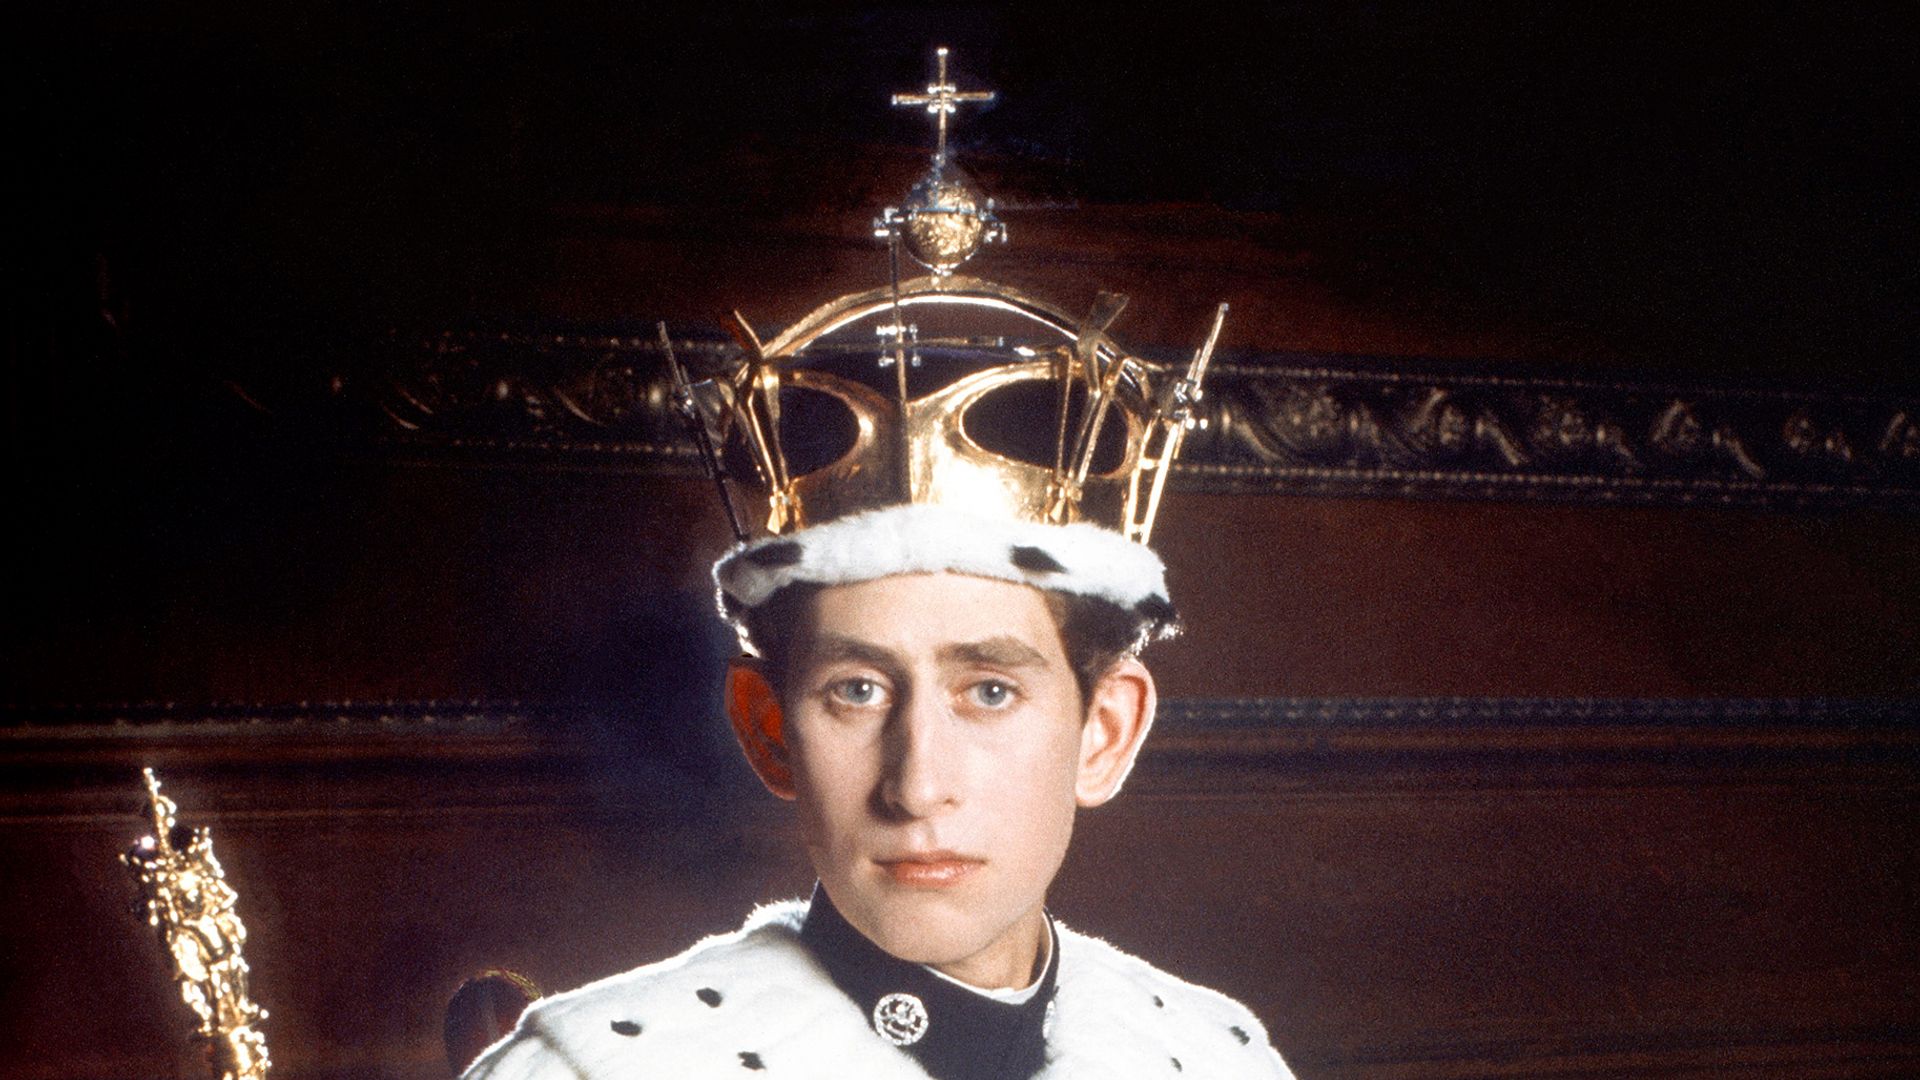 Prince Charles, photographed during the investiture ceremony of him becoming the Prince of Wales at Windsor Castle in July 1969.